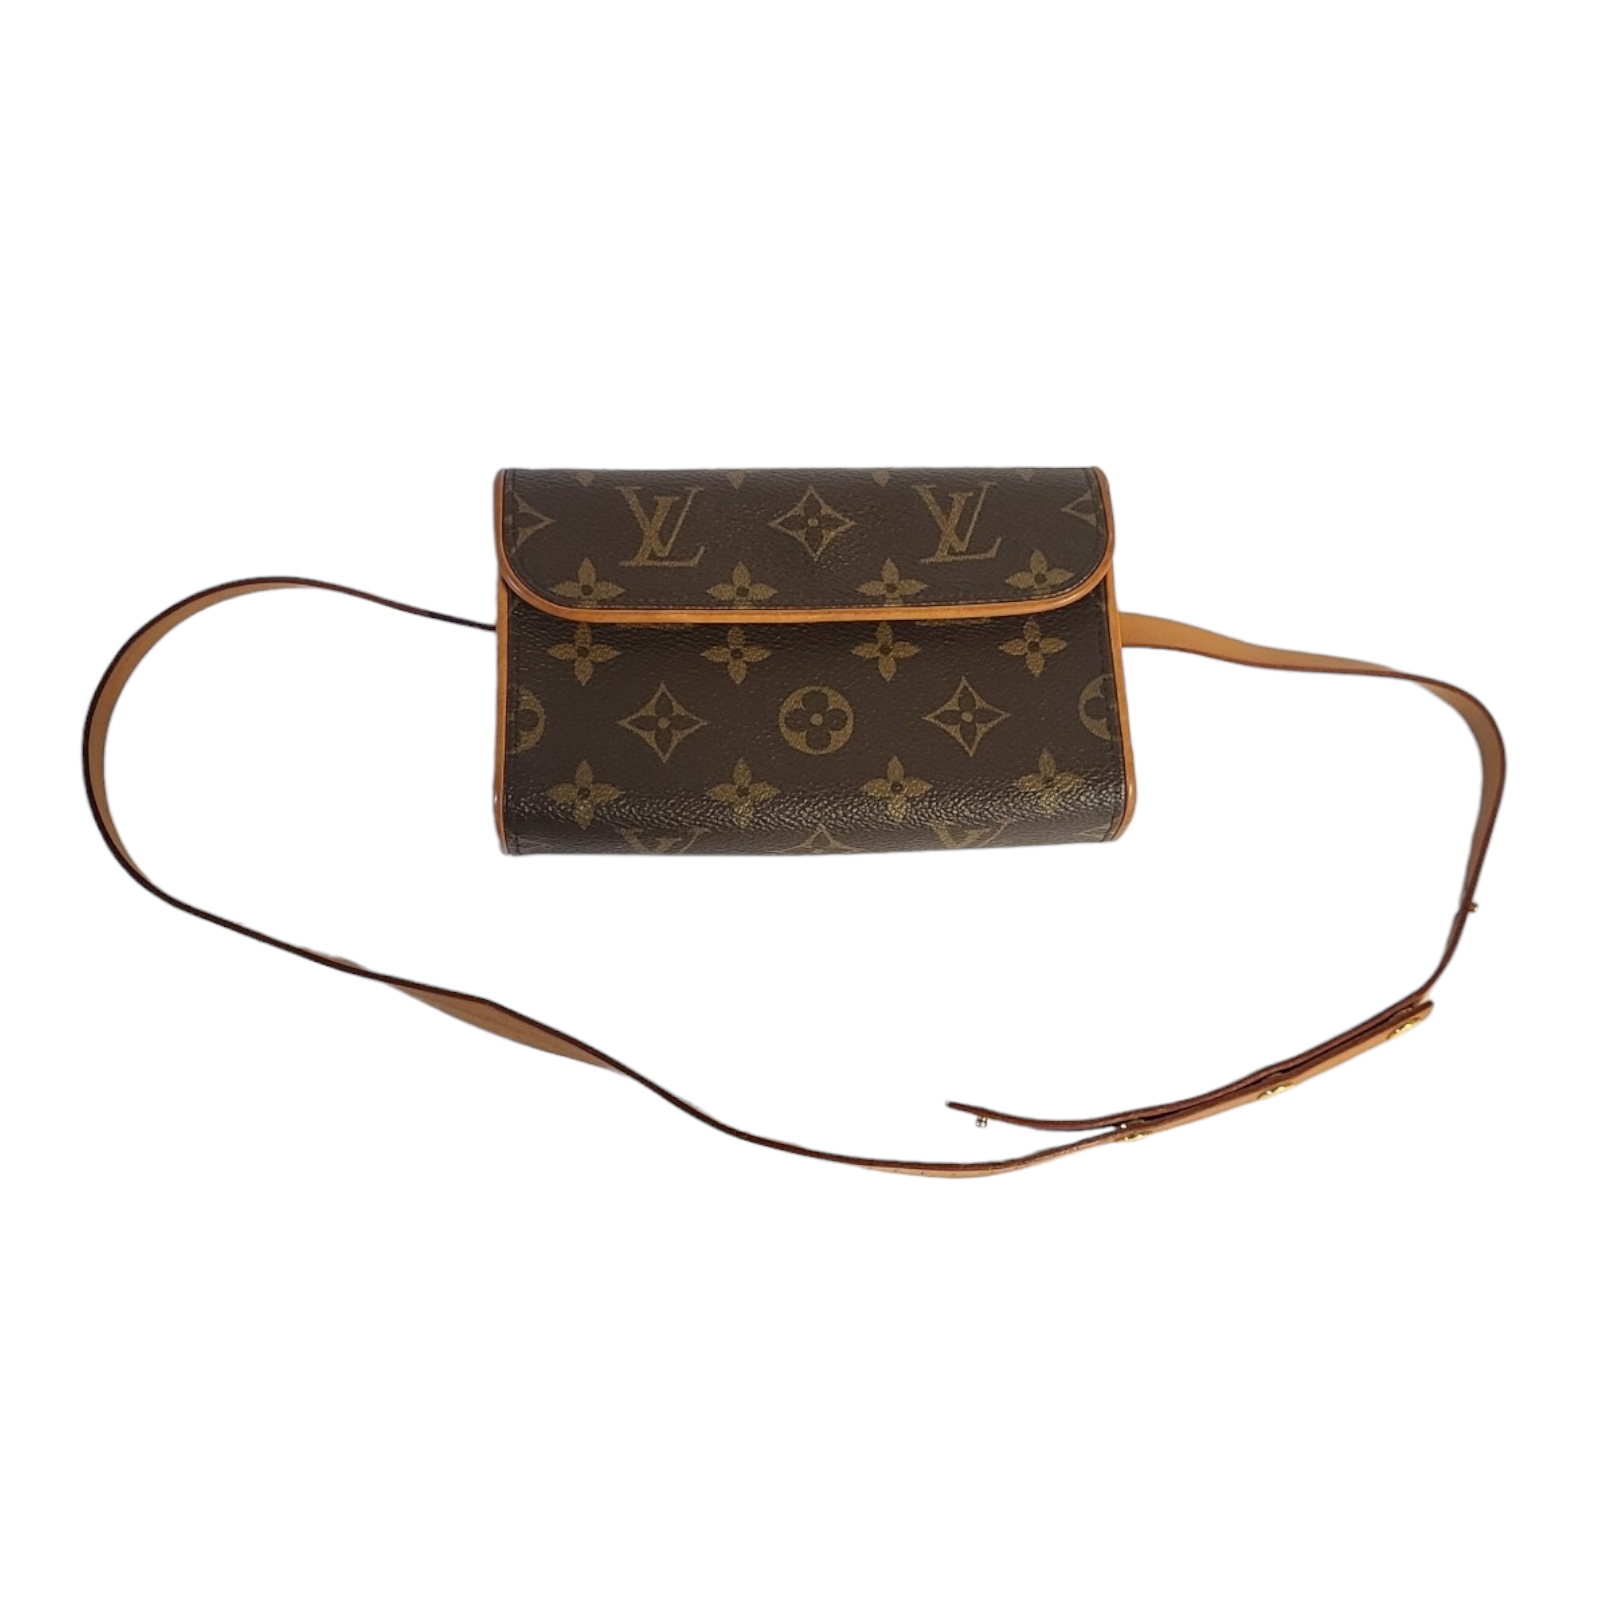 LOUIS VUITTON, A VINTAGE BROWN LEATHER CLUTCH PURSE Having a single handle and LV monogram, in a - Image 4 of 9